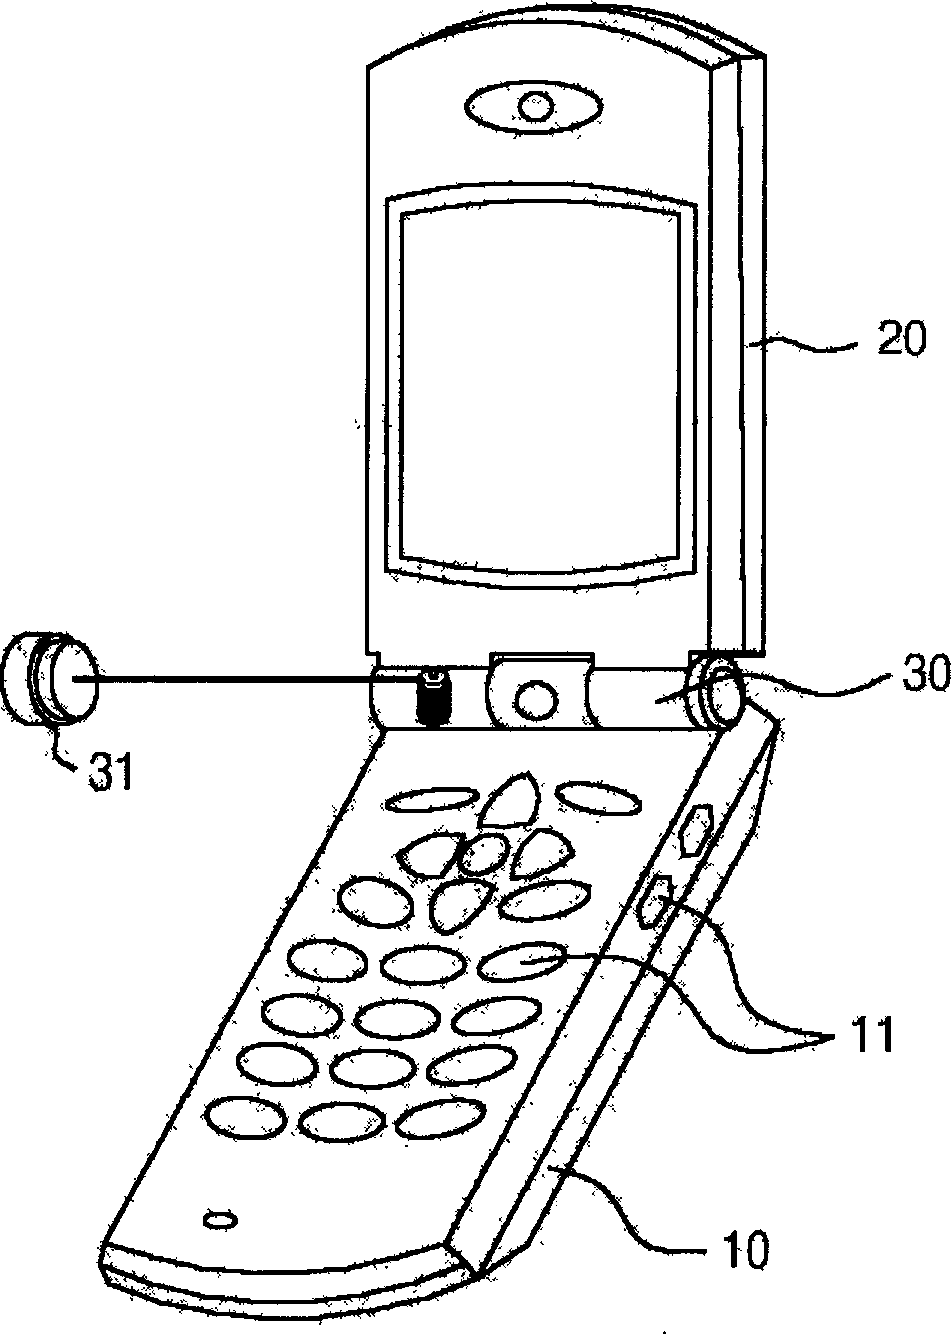 Mobile communication terminal with length measurer